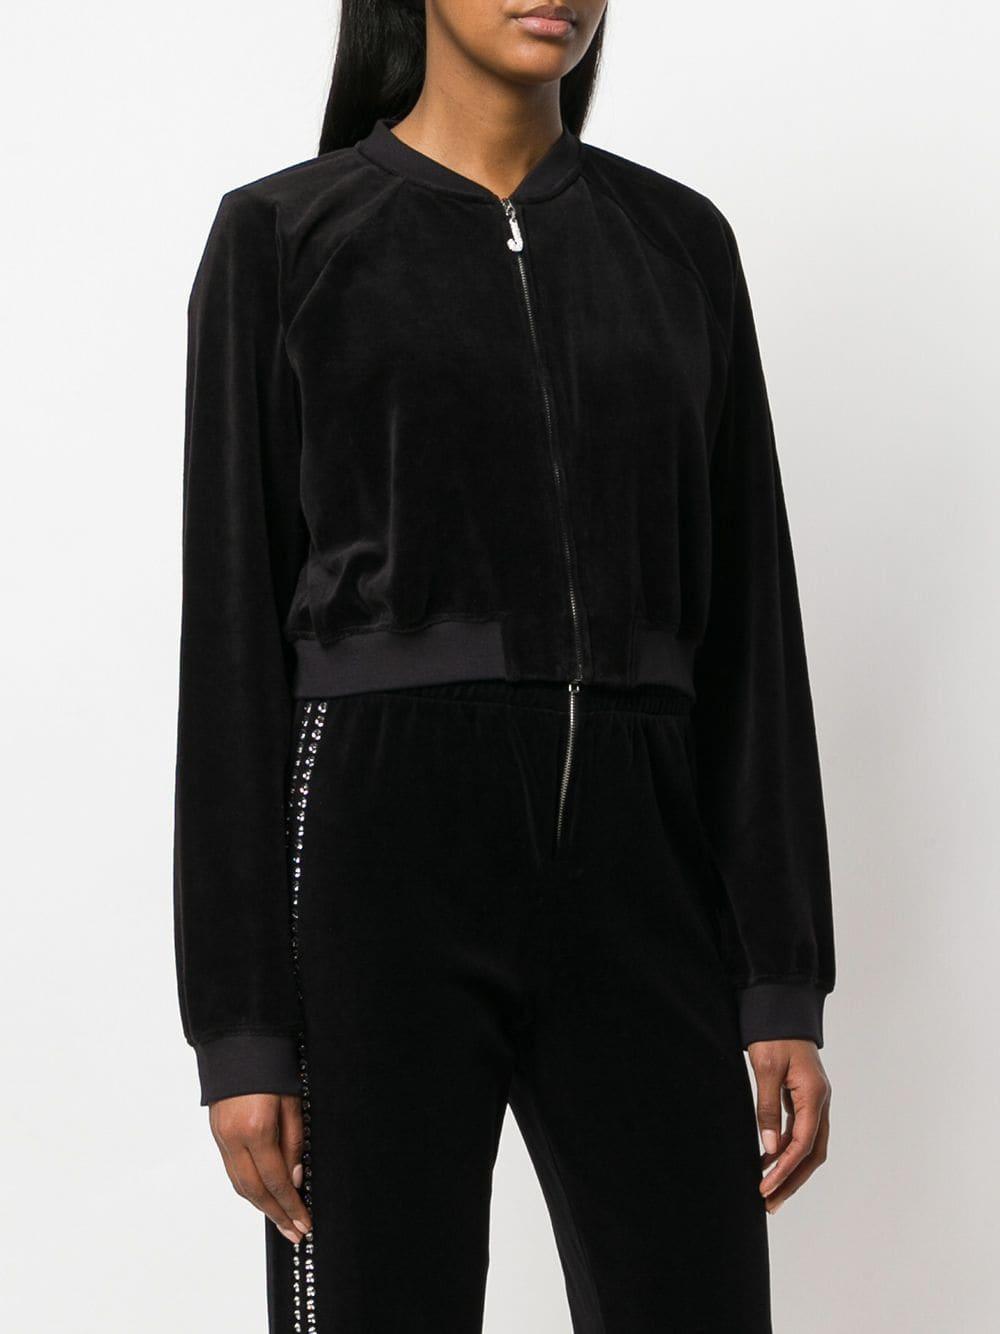 Juicy Couture Cotton Cropped Zipped Jacket in Black - Save 94% - Lyst